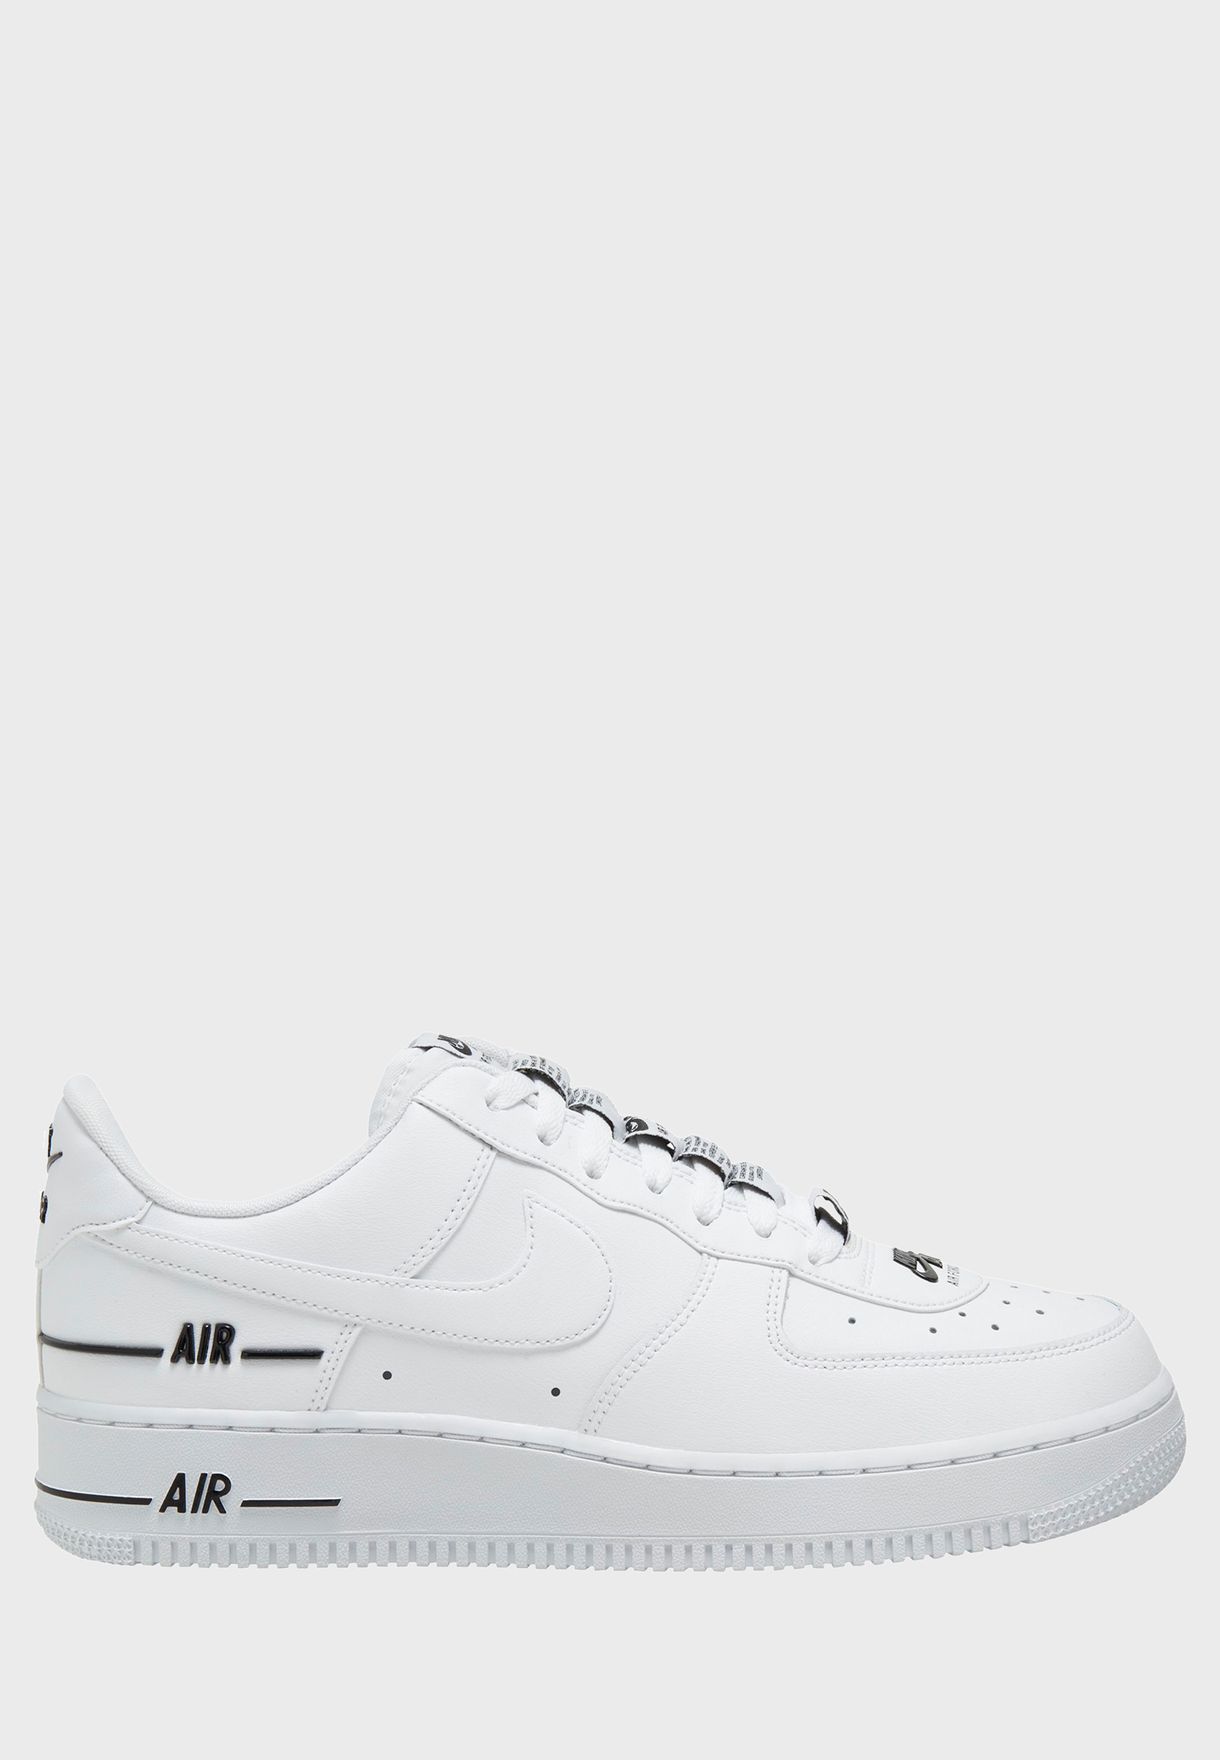 air force one 07 lv8 3